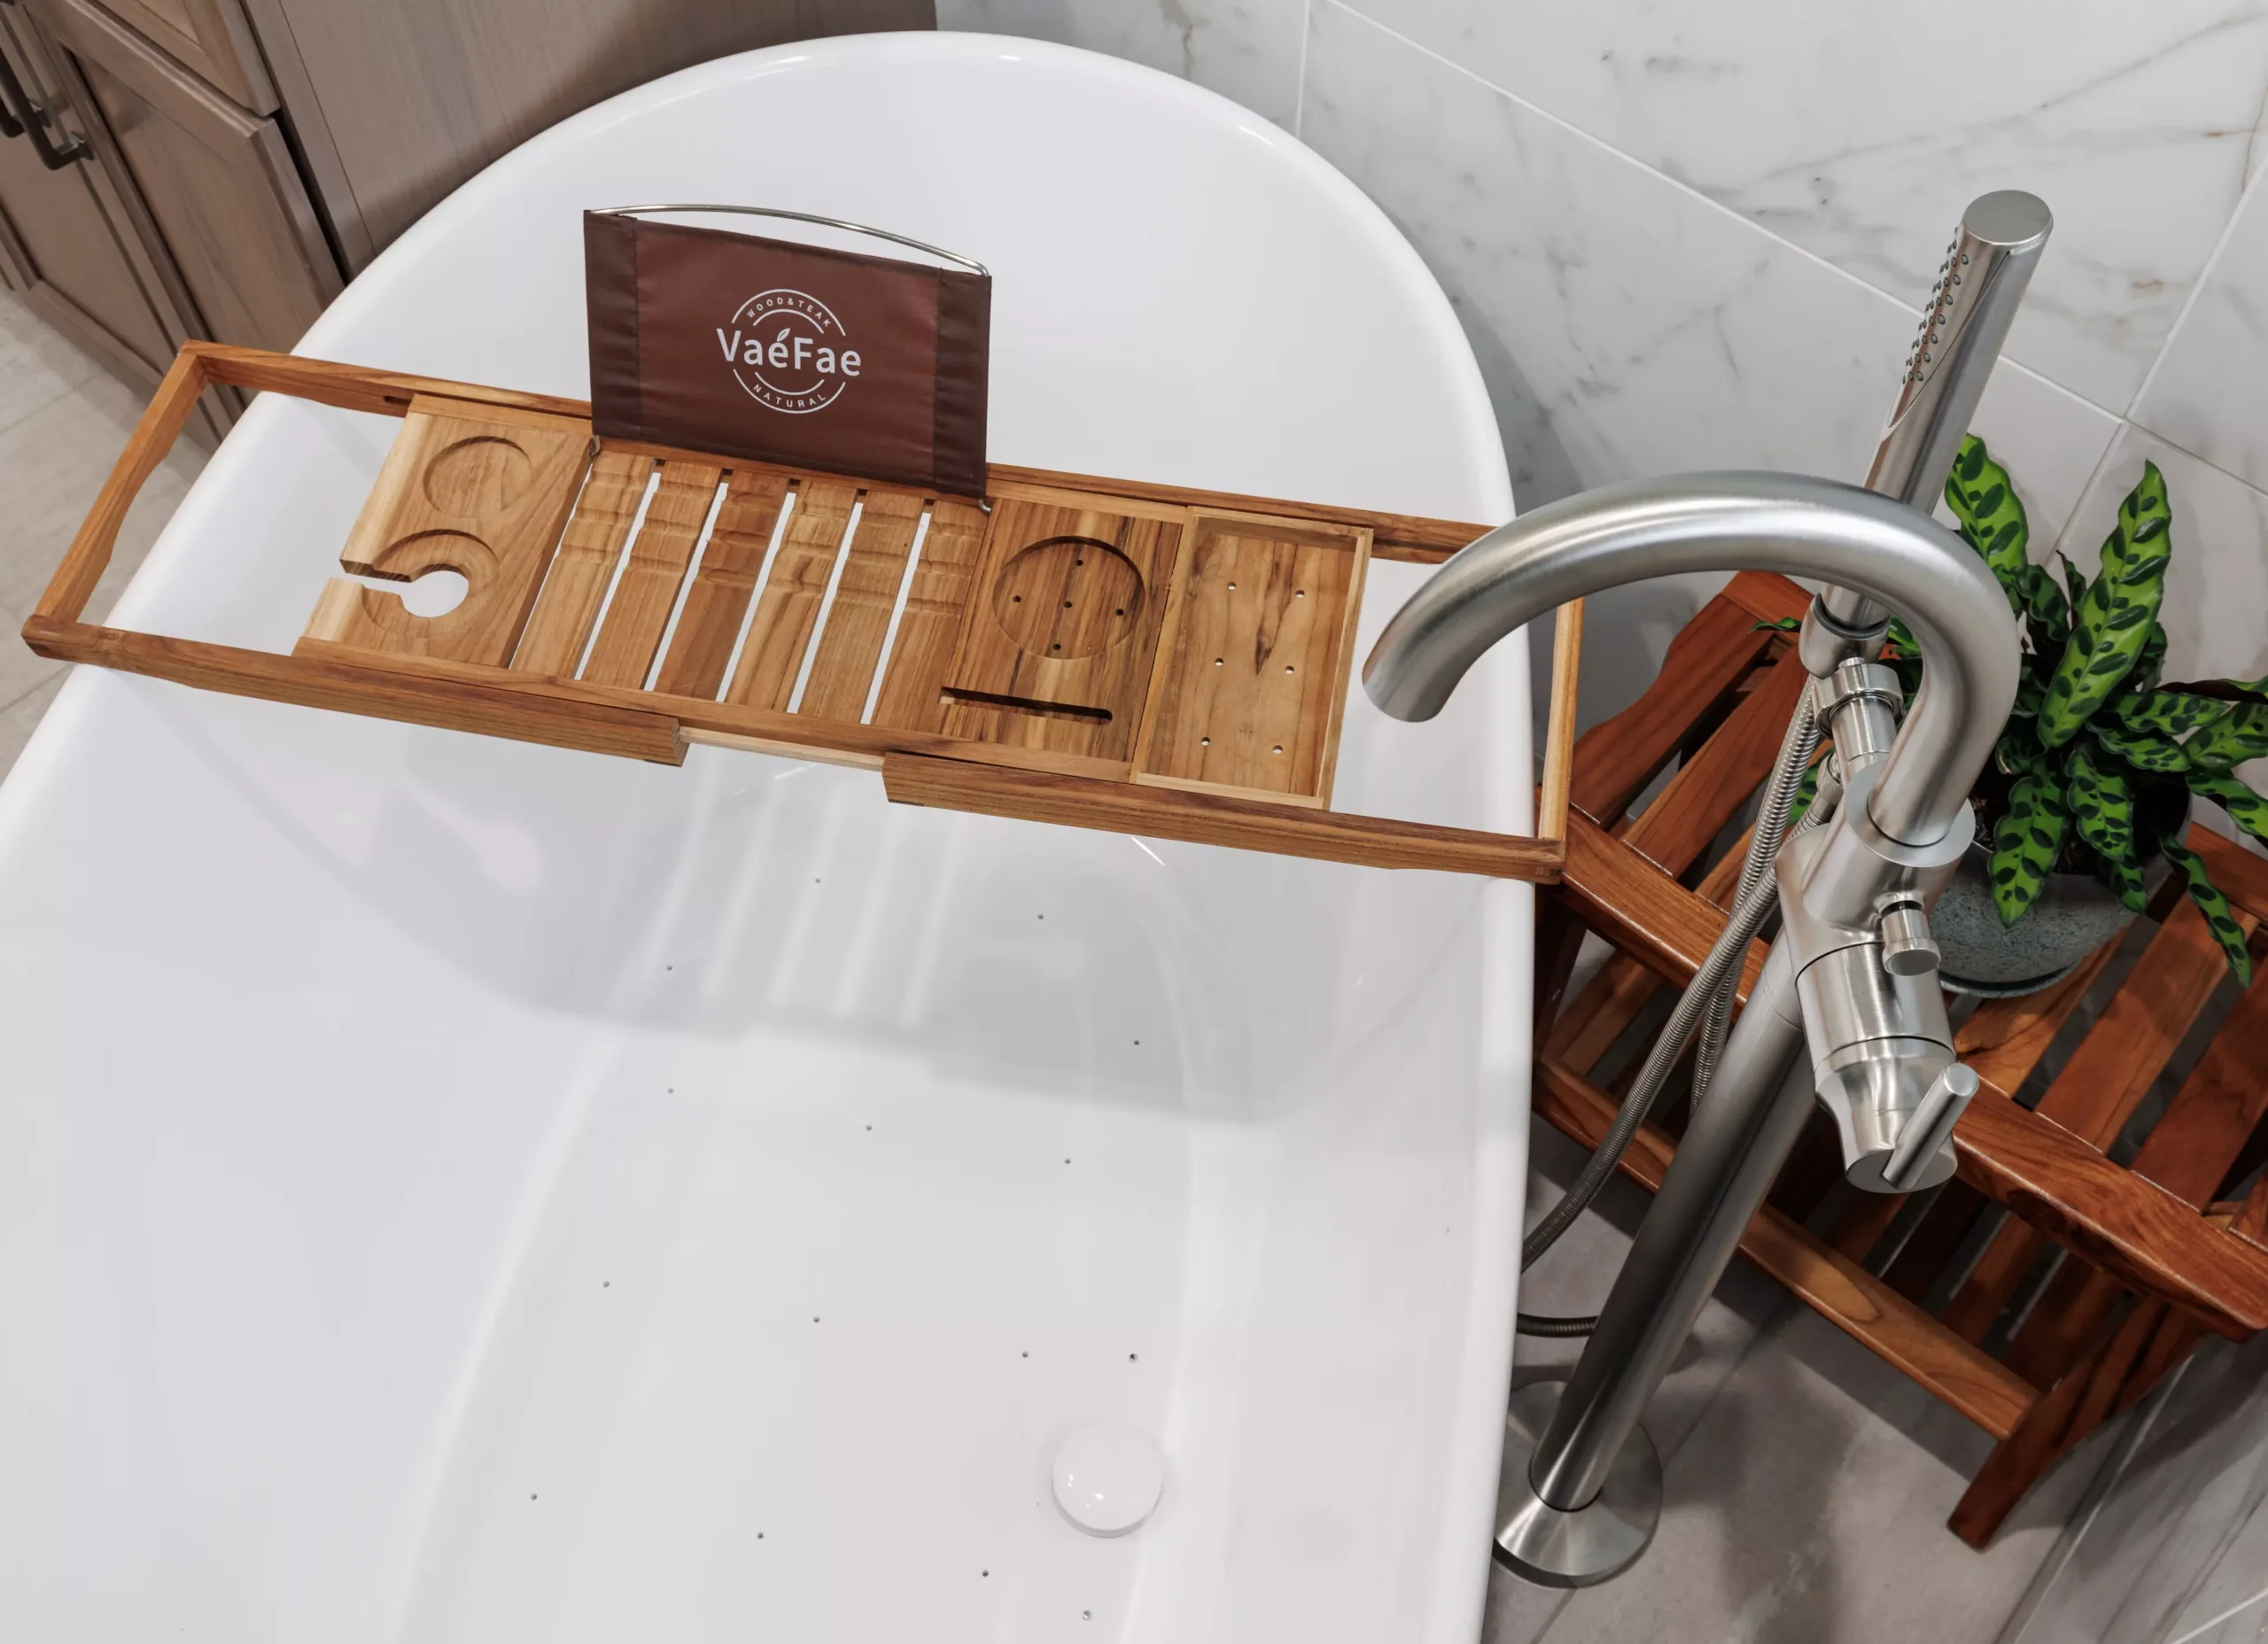 A bathroom with a wooden tub holder and a plant, perfect for a home renovation or bathroom remodel.